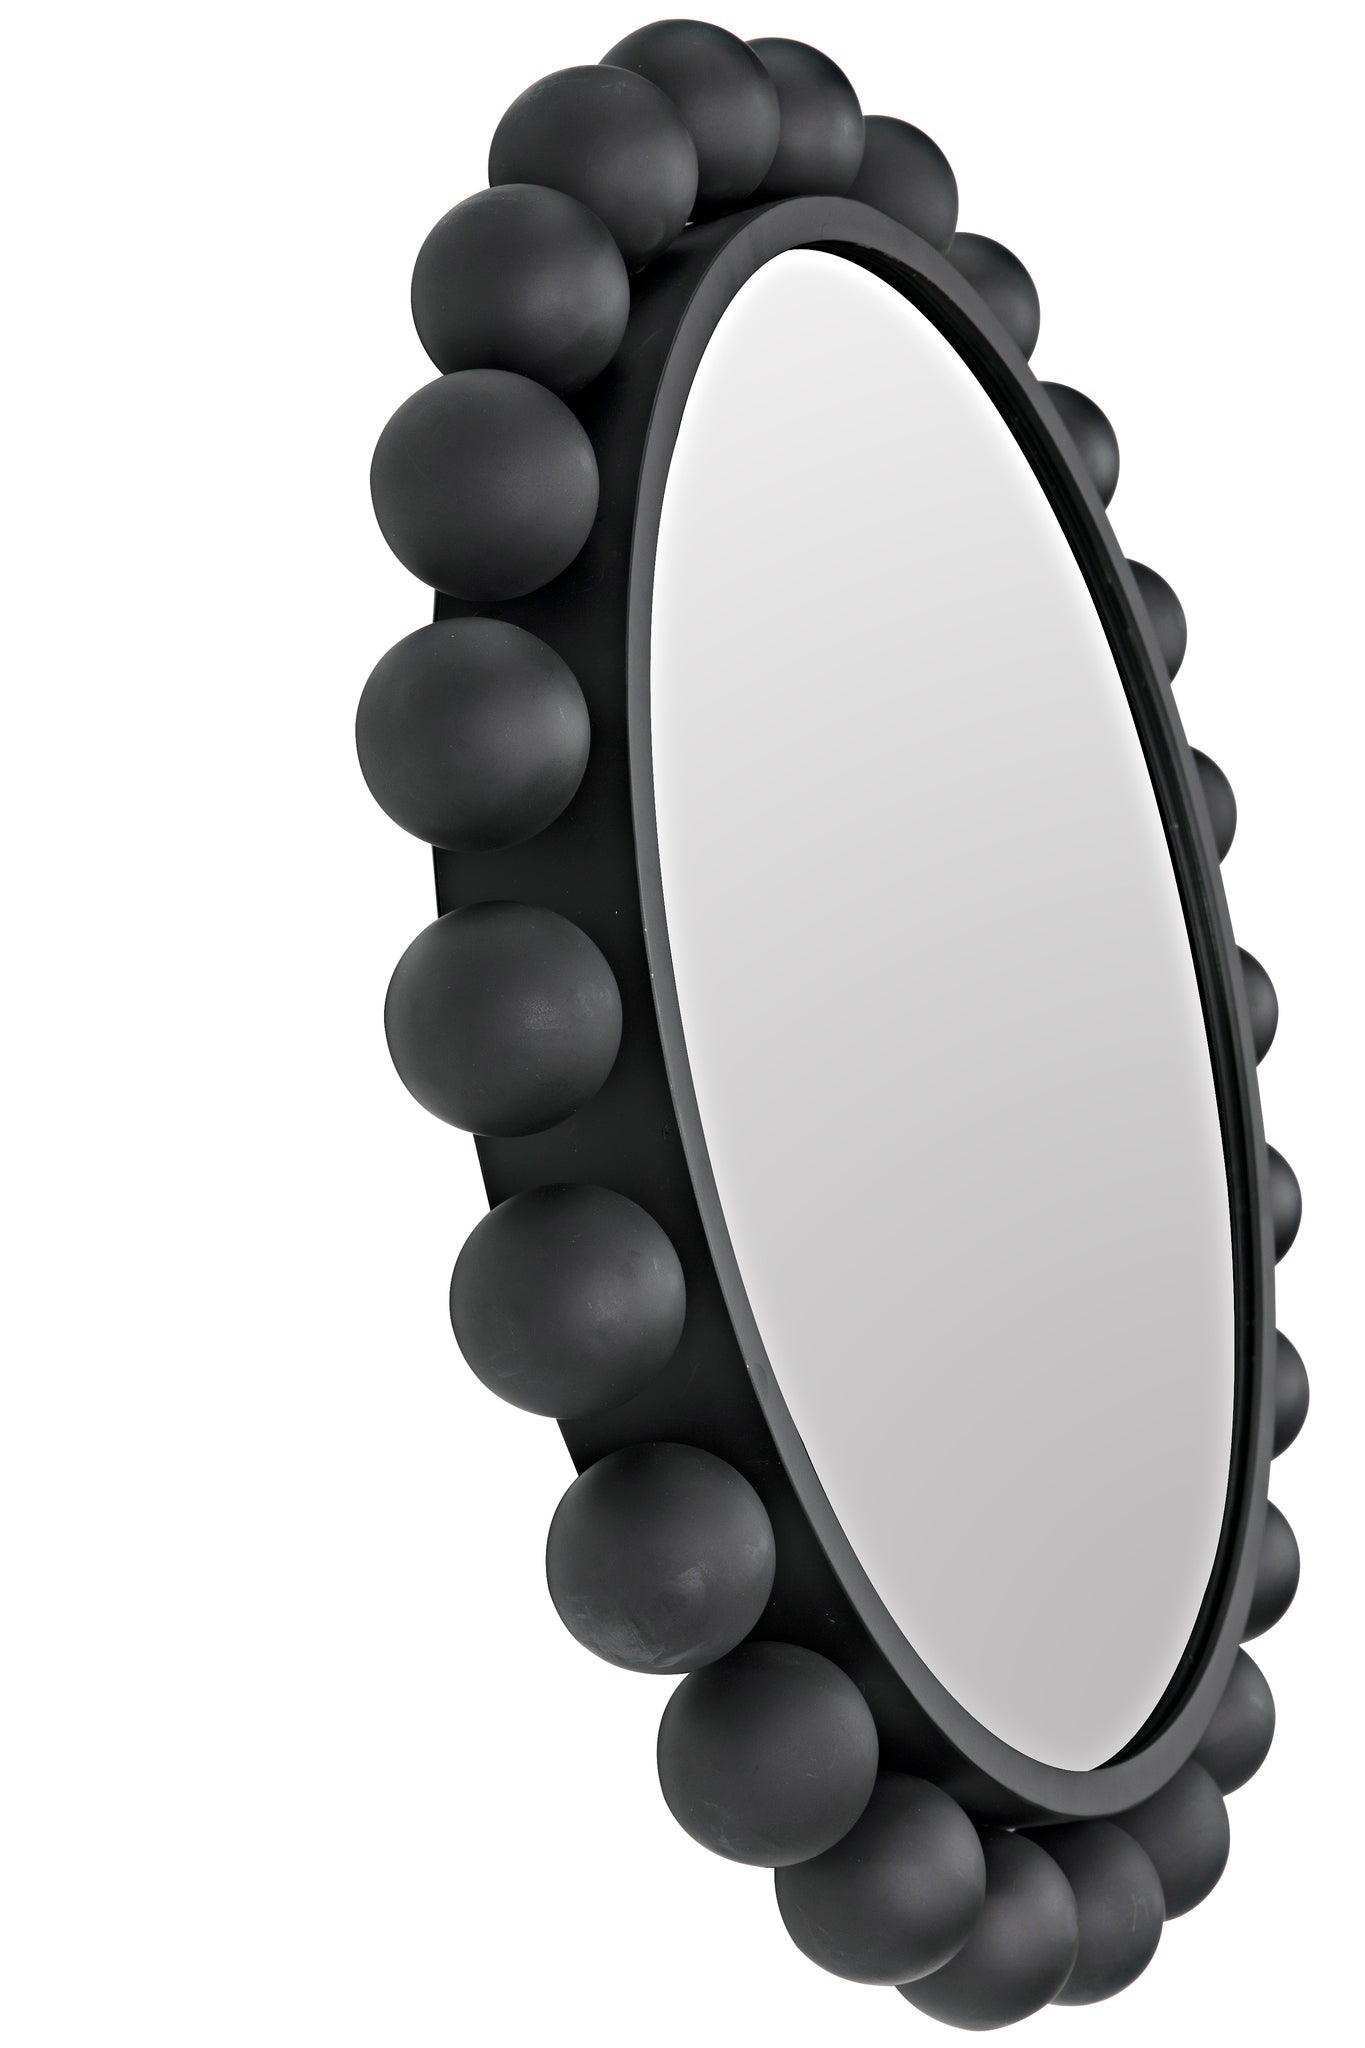 Cooper Black Steel Round Mirror-Wall Mirrors-Noir-Sideboards and Things